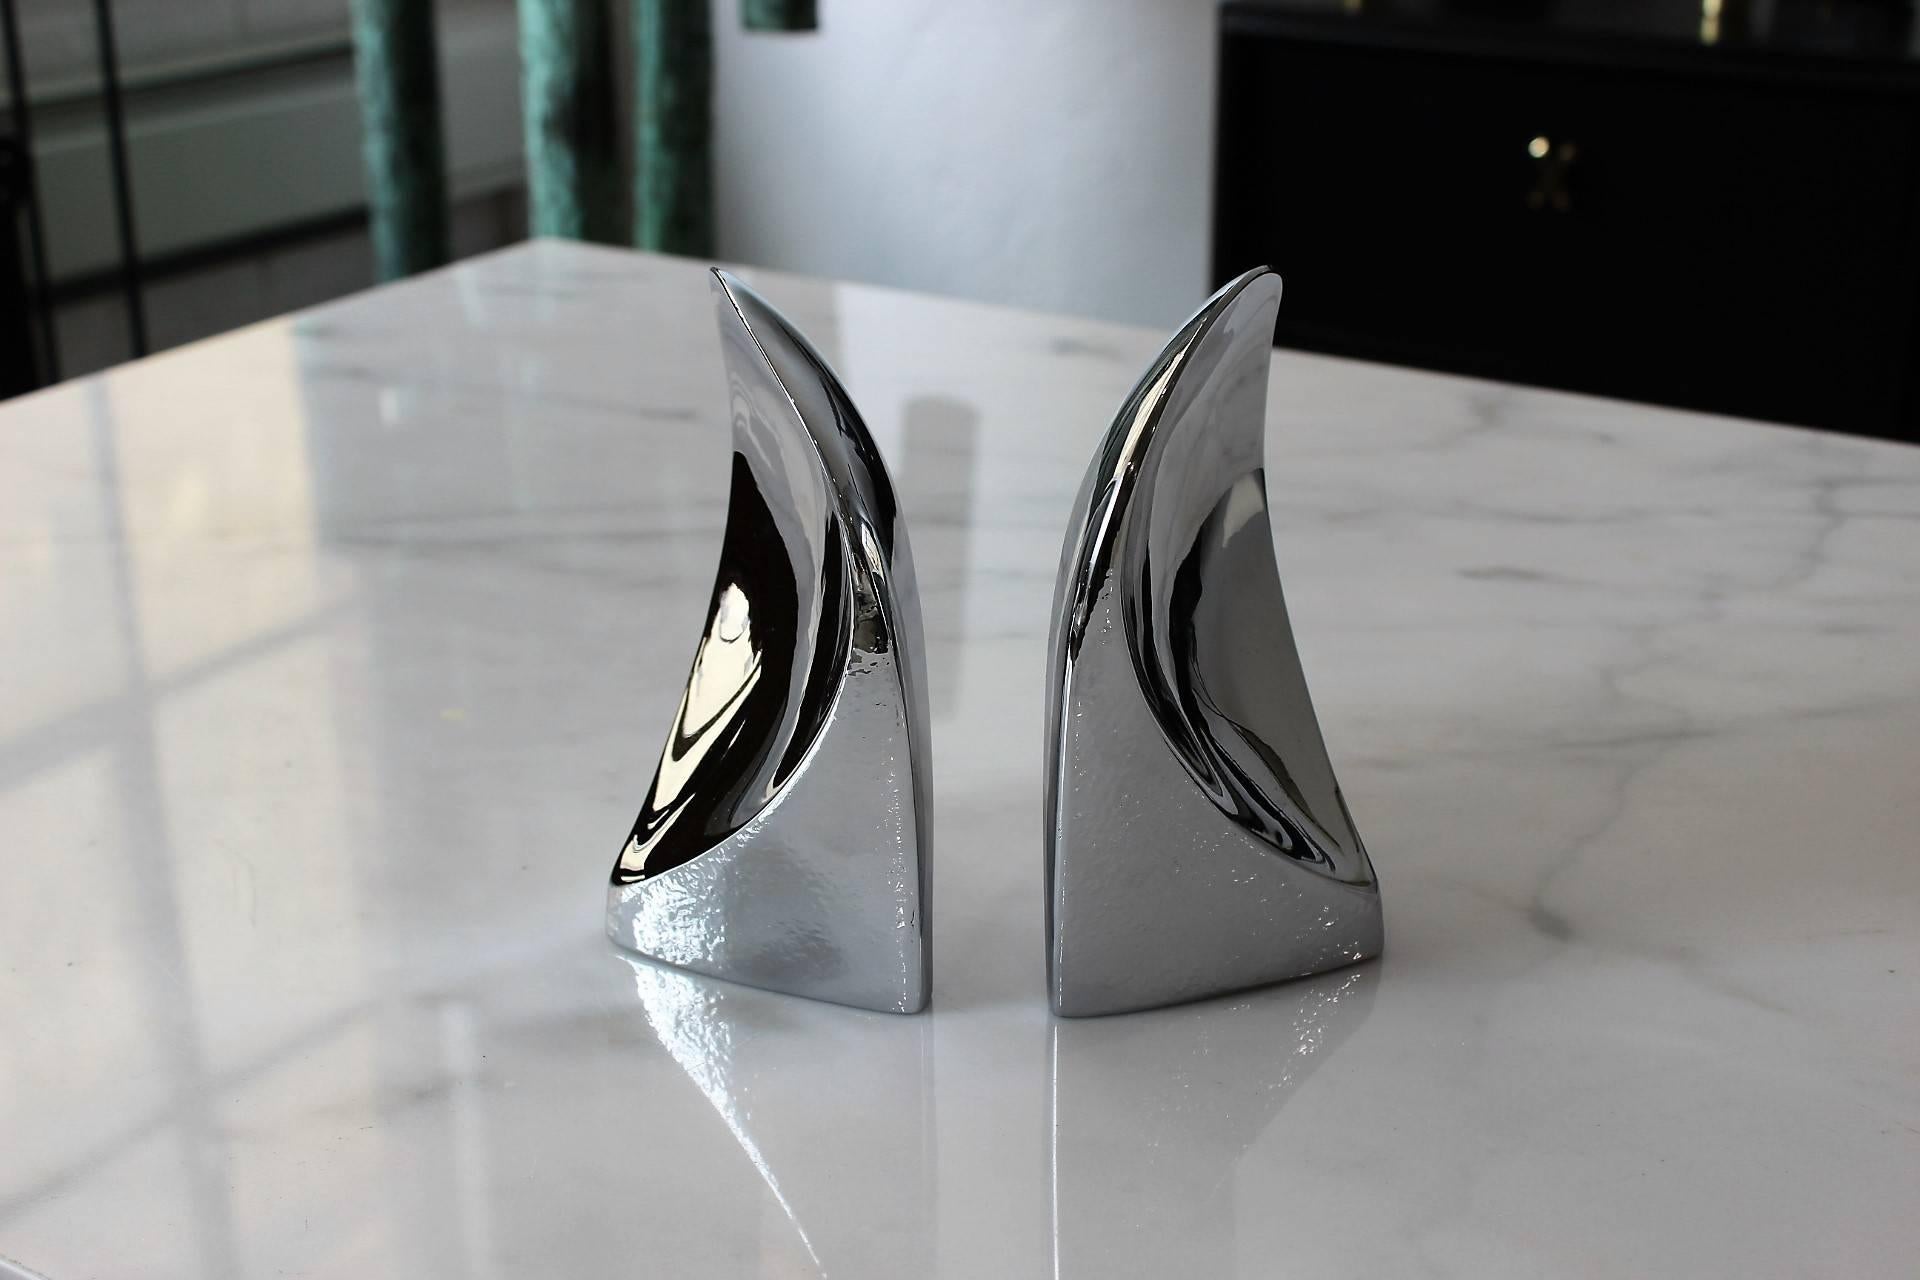 Chrome shovel bookends by Ben Seibel for Jenfredware, 1950s. Newly restored and in perfect condition.

See this item in our private NYC showroom! Refine Limited is located in the heart of Chelsea at the history Starrett-LeHigh Building, 601 West